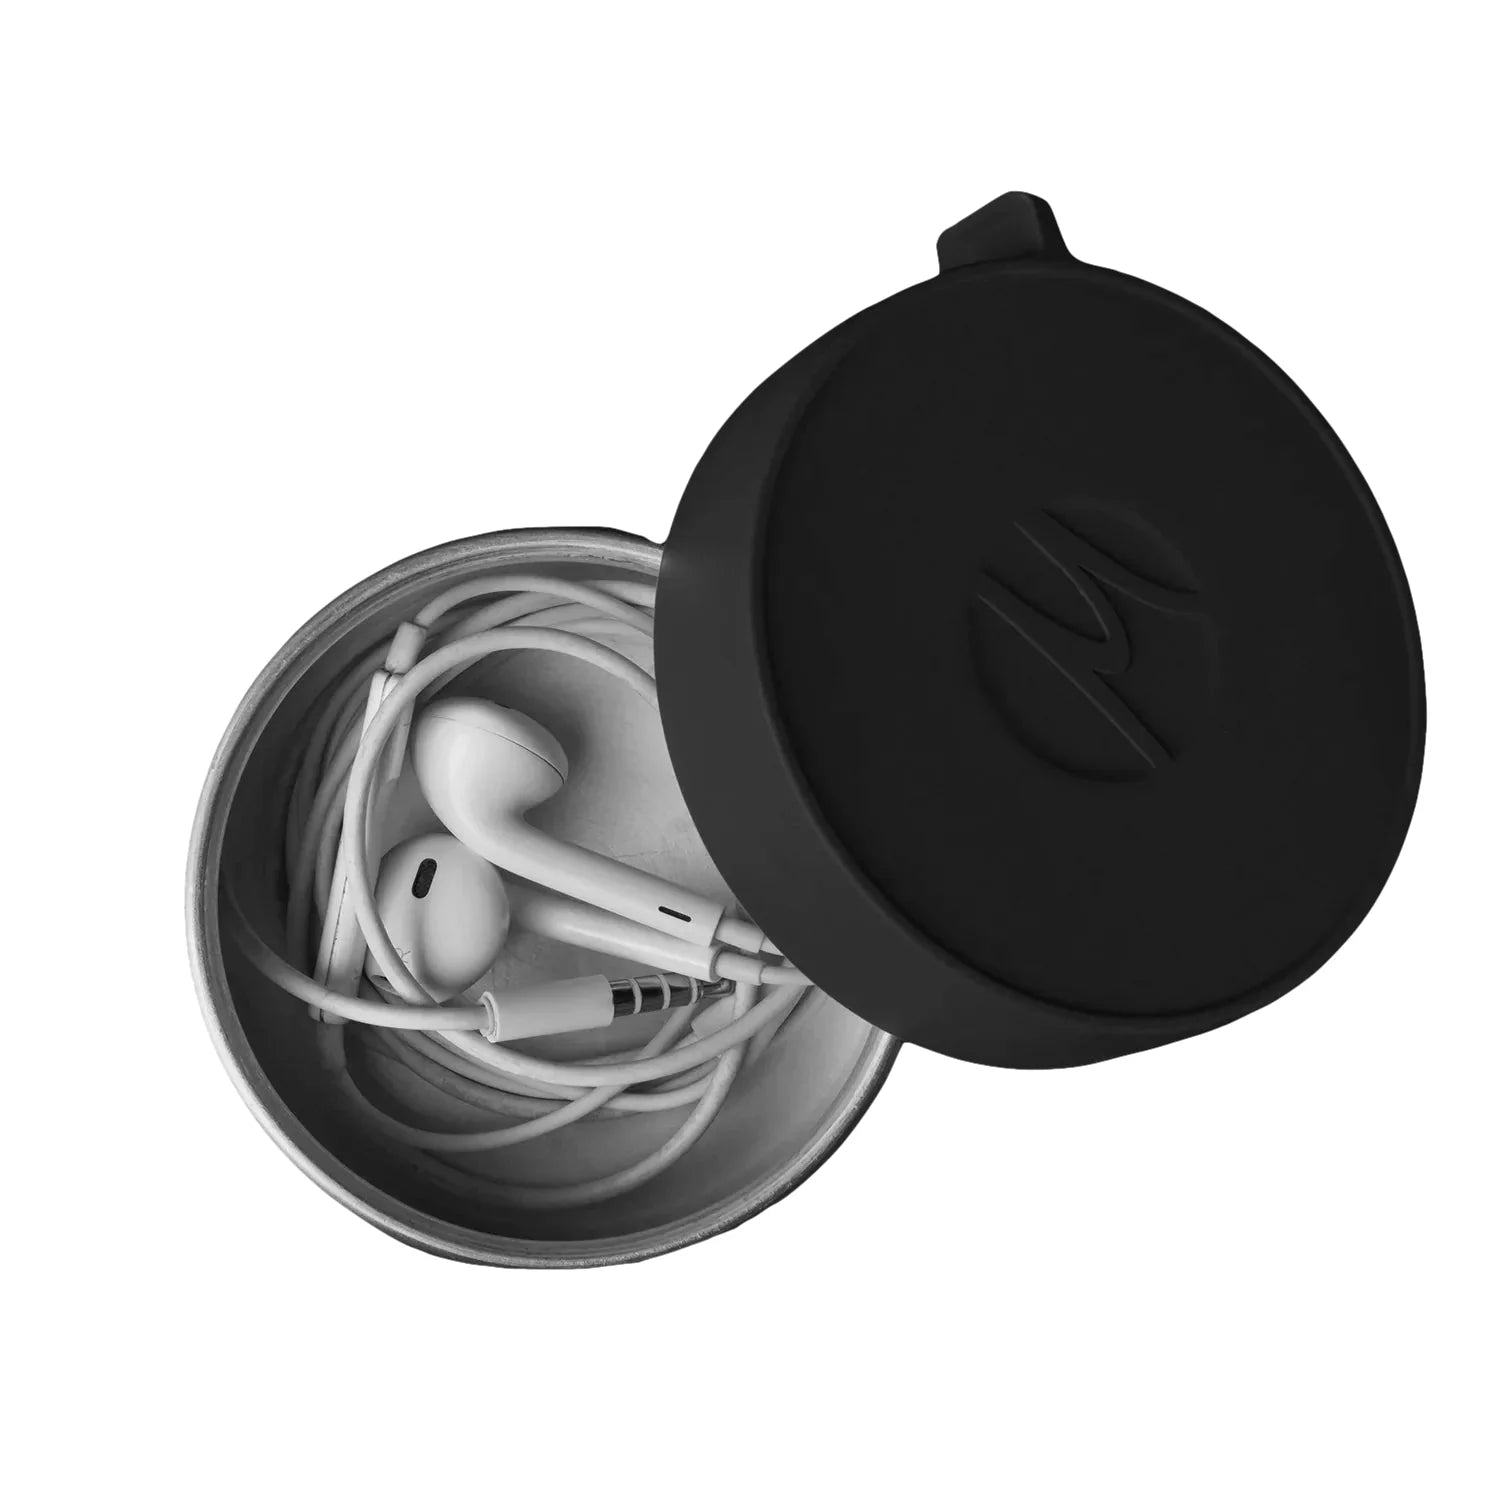 Matador Waterproof Travel Canister, Charcoal, top view with headphones